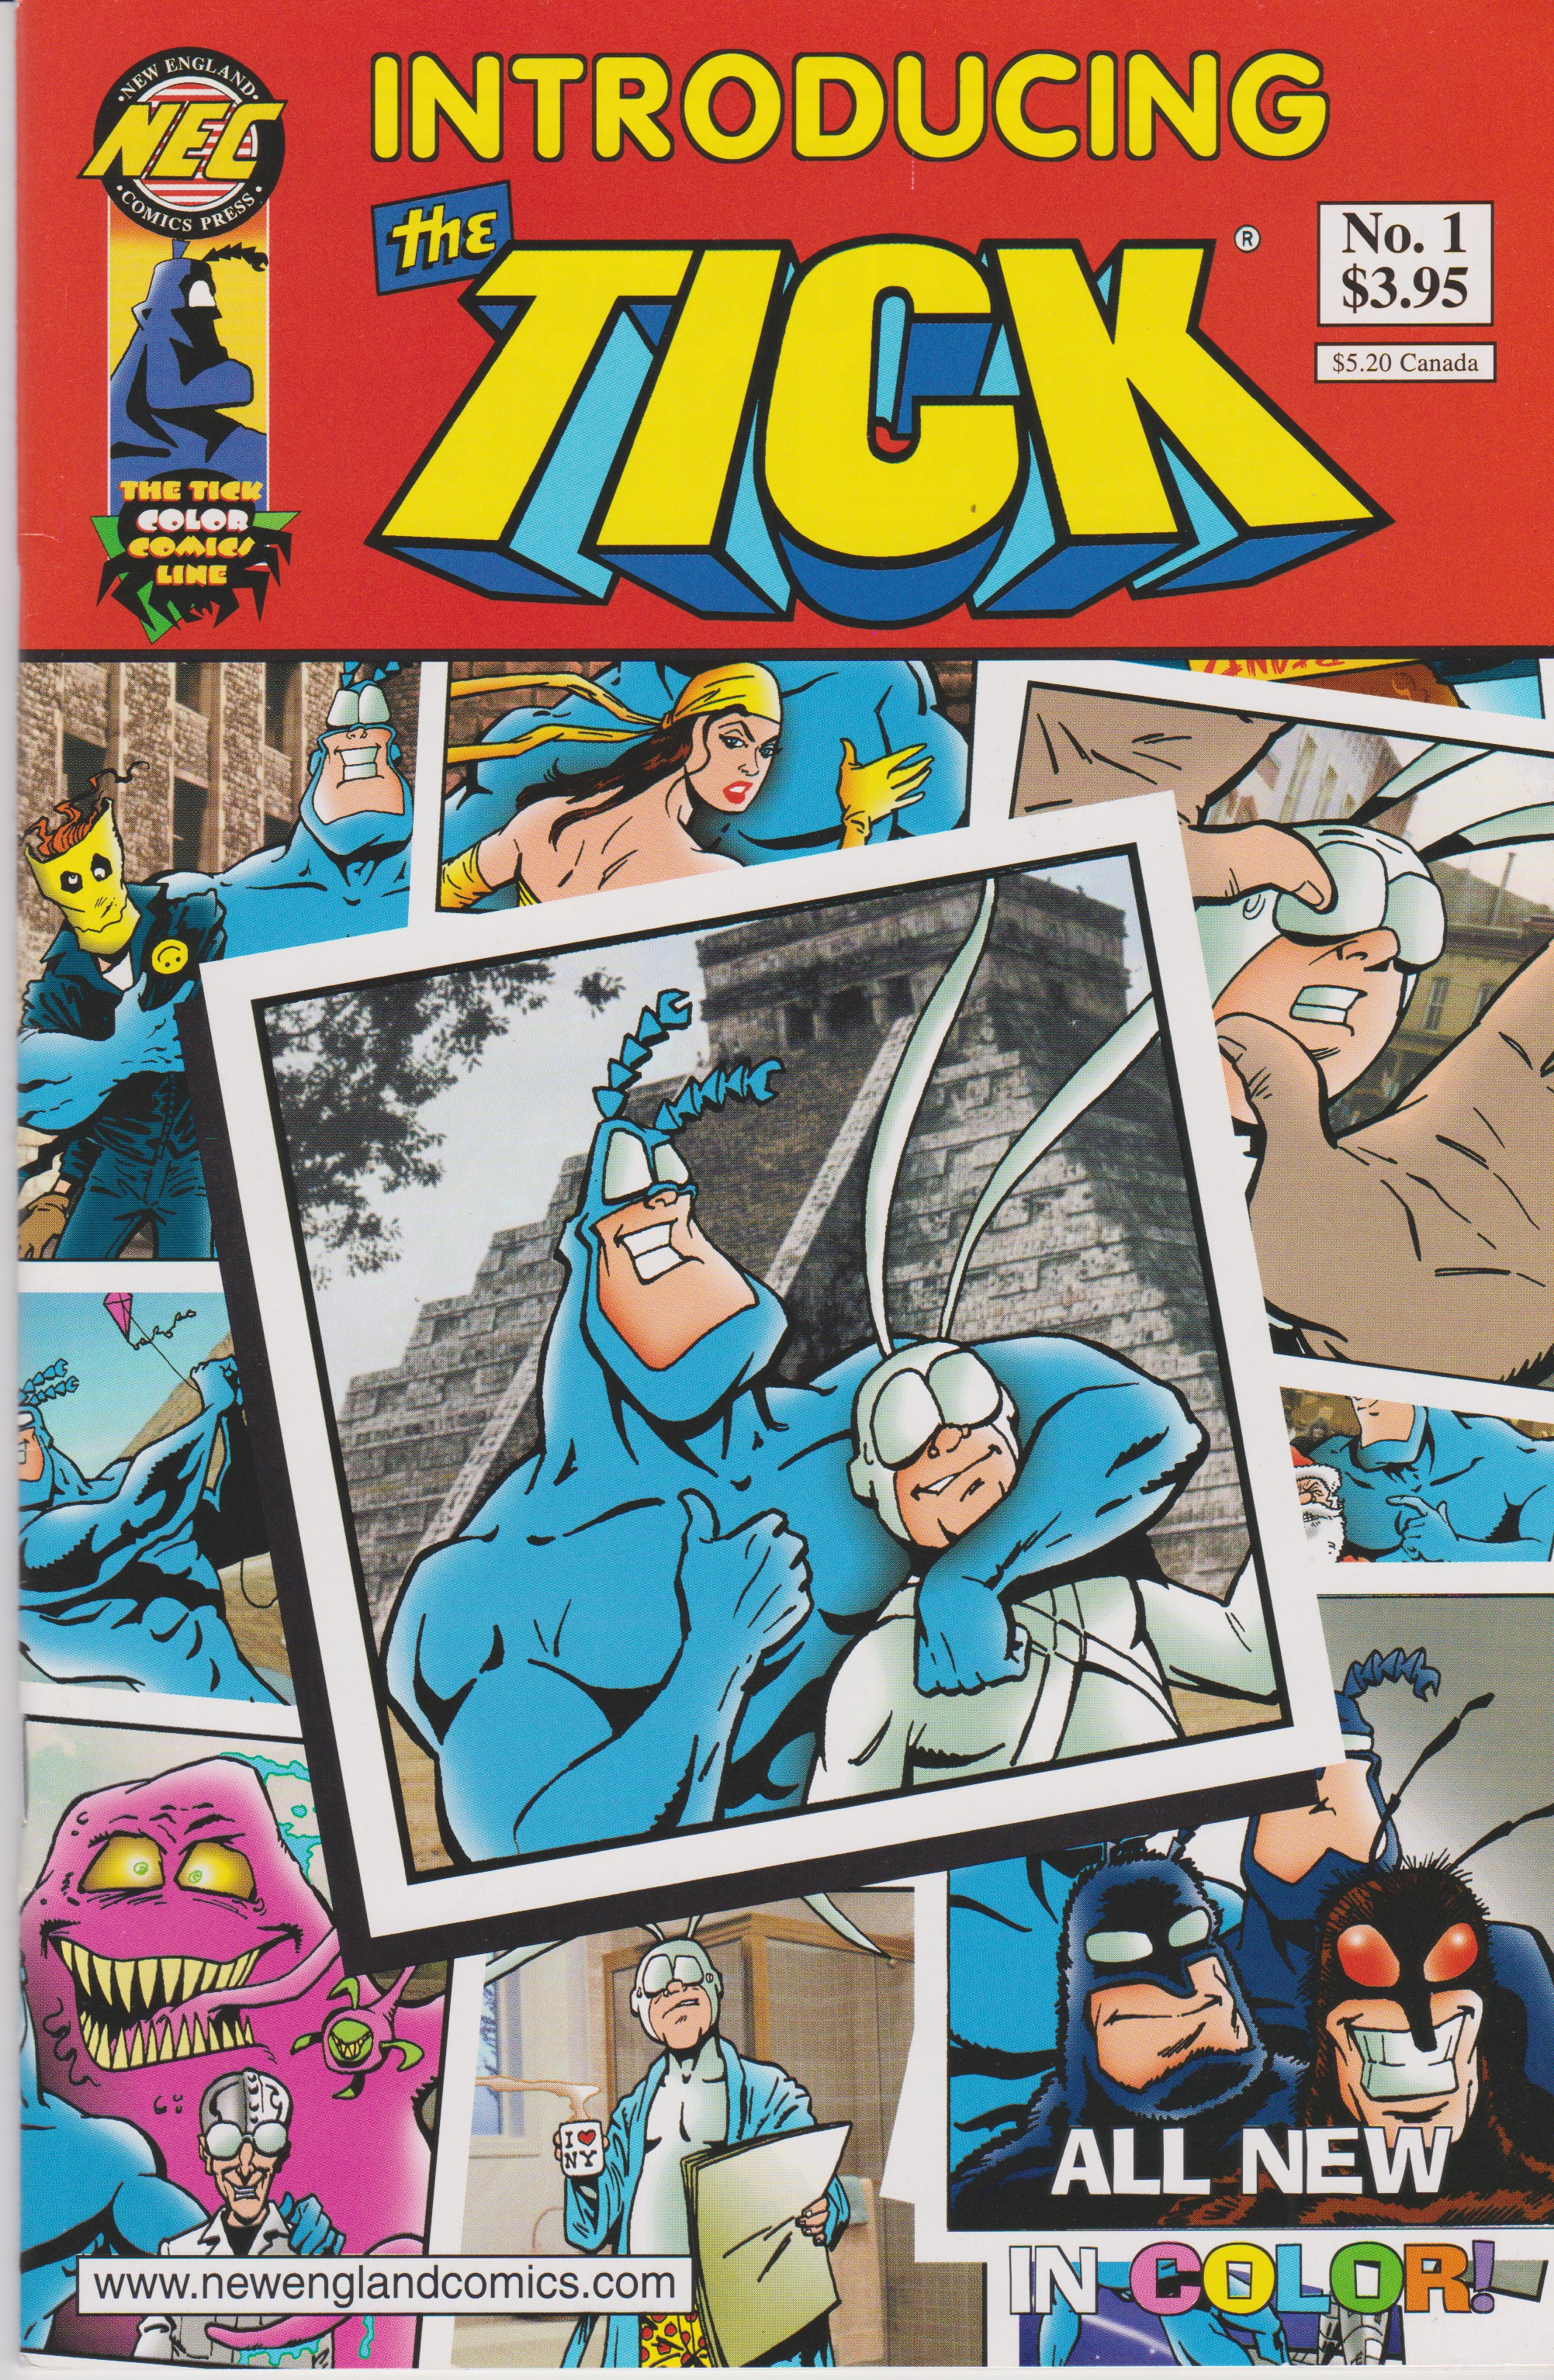 Read online Introducing The Tick comic -  Issue # Full - 1